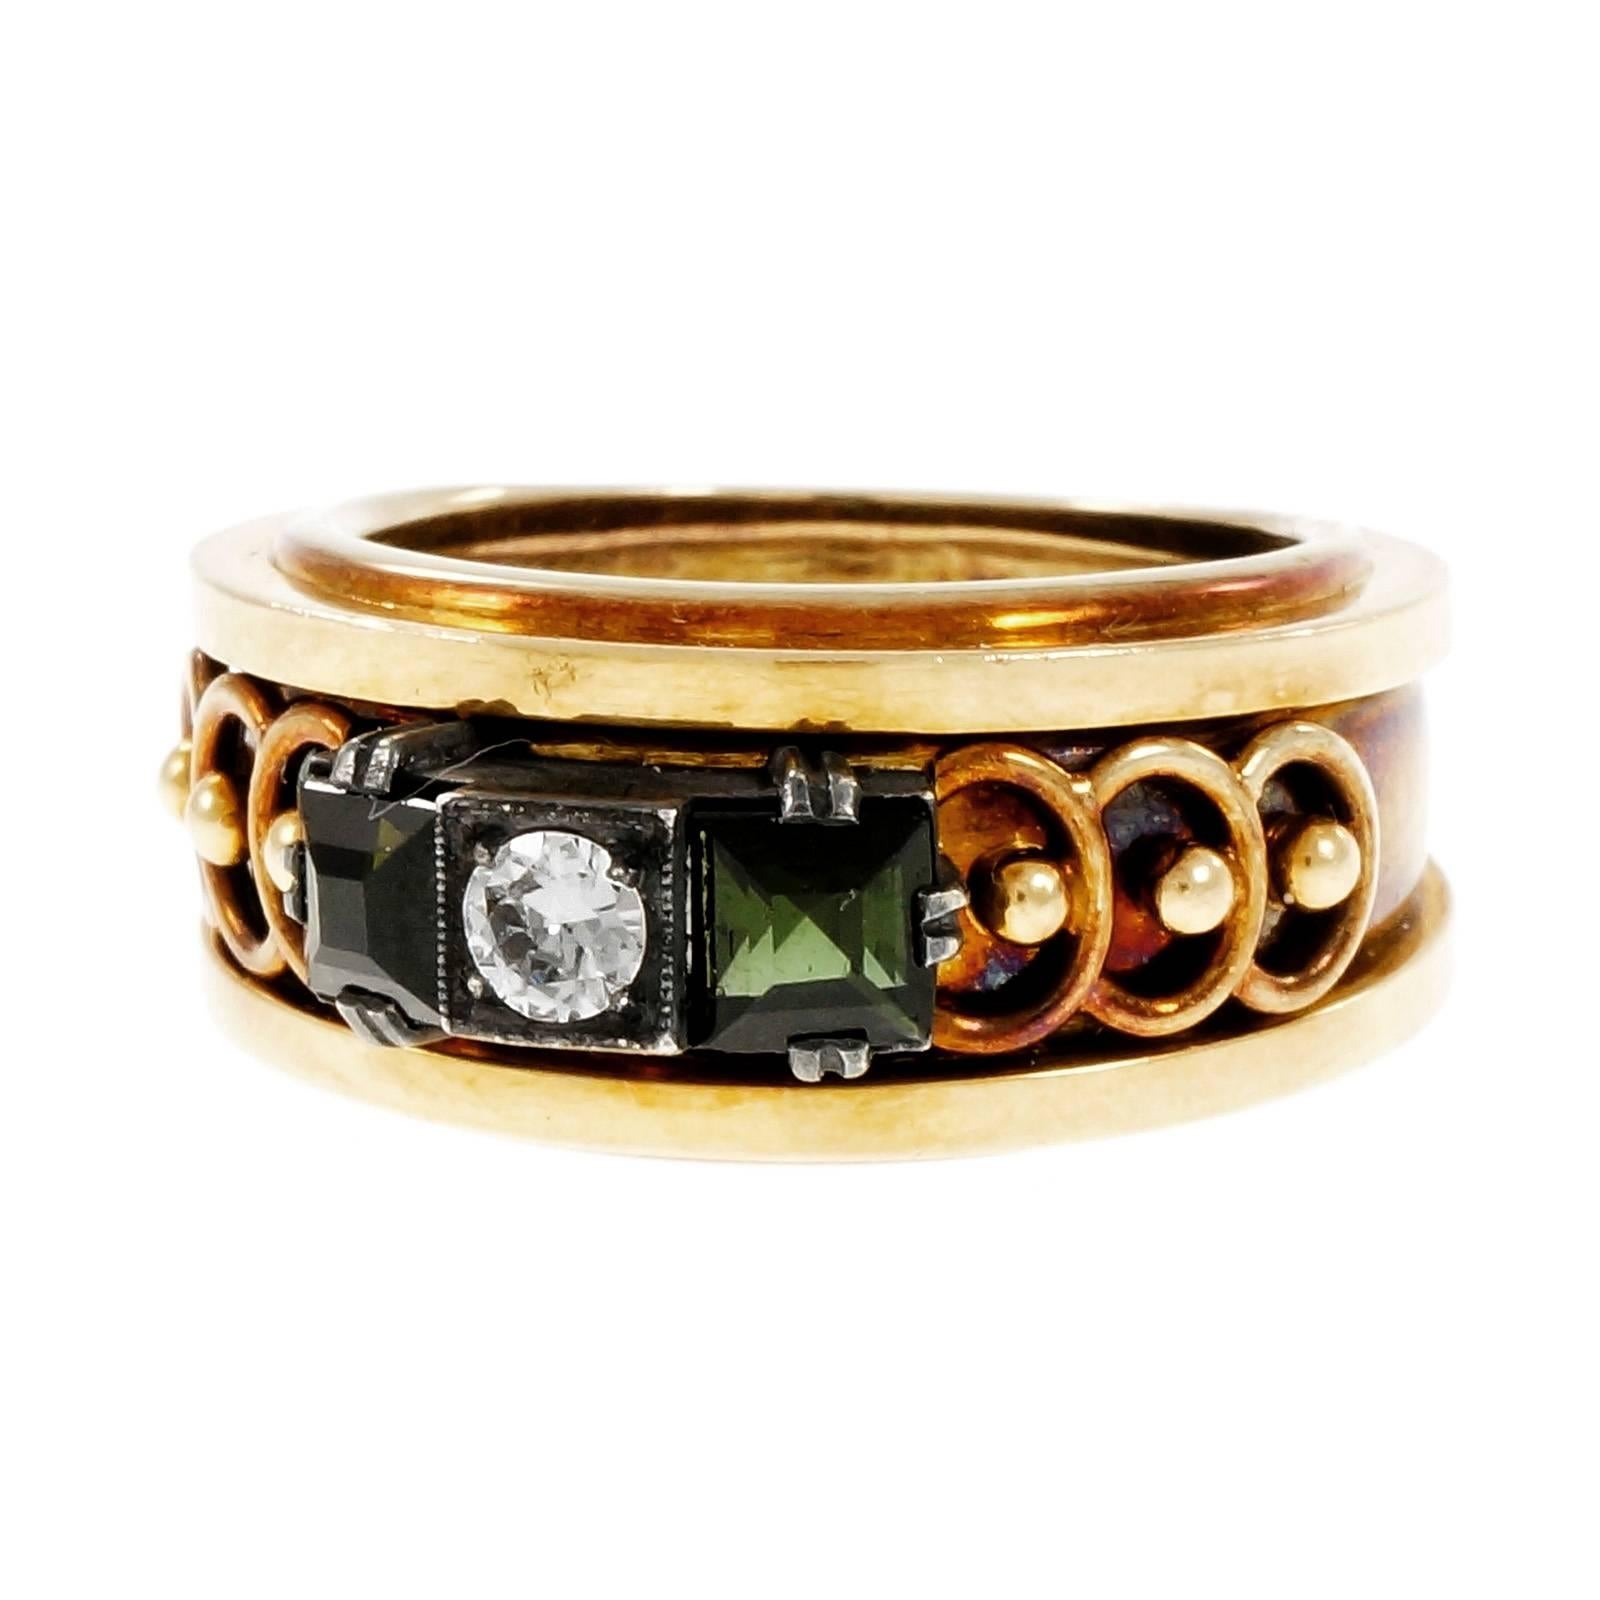 Victorian Tourmaline Diamond Gold Silver Band Ring with natural patina.  14k yellow gold handmade with silver top set with old cut green Tourmaline and European cut diamond.

1 round diamond, approx. total weight .16cts, H, SI1
2 square green